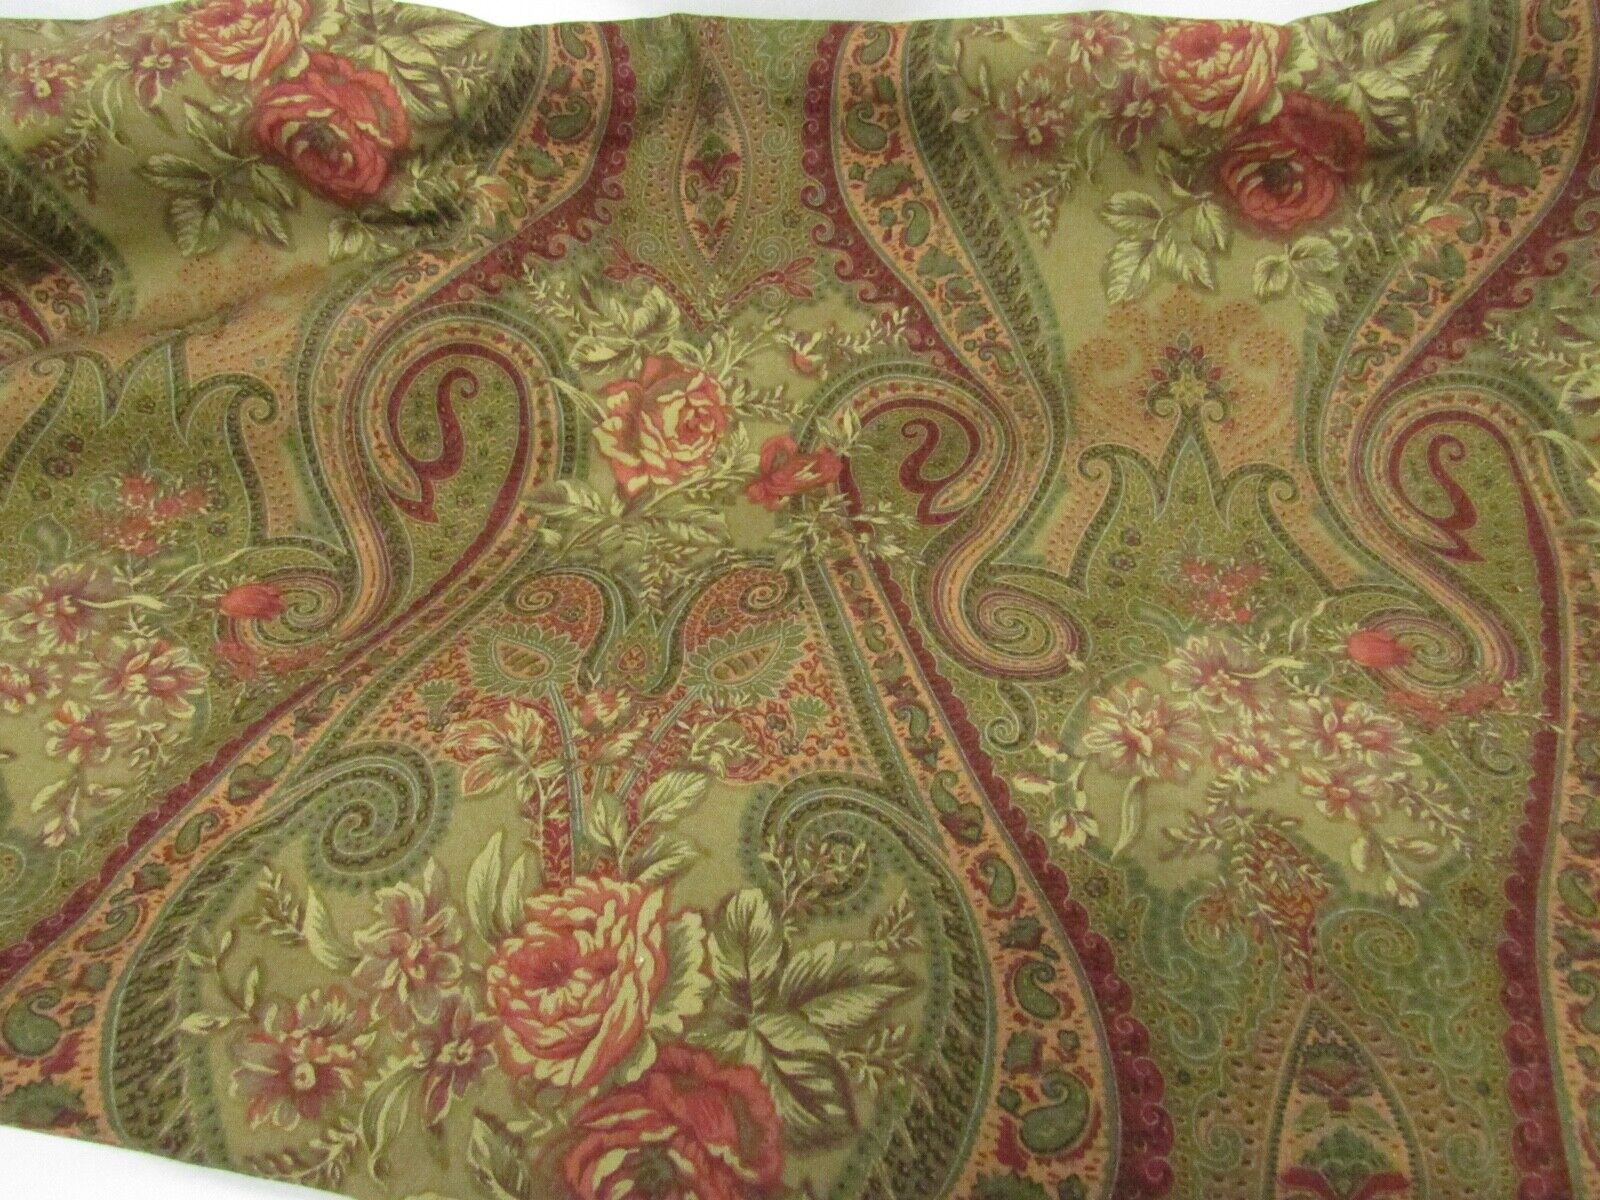 VTG Ralph Lauren Home Decor Fabric Paisley Floral Brown 3 YDS English Country